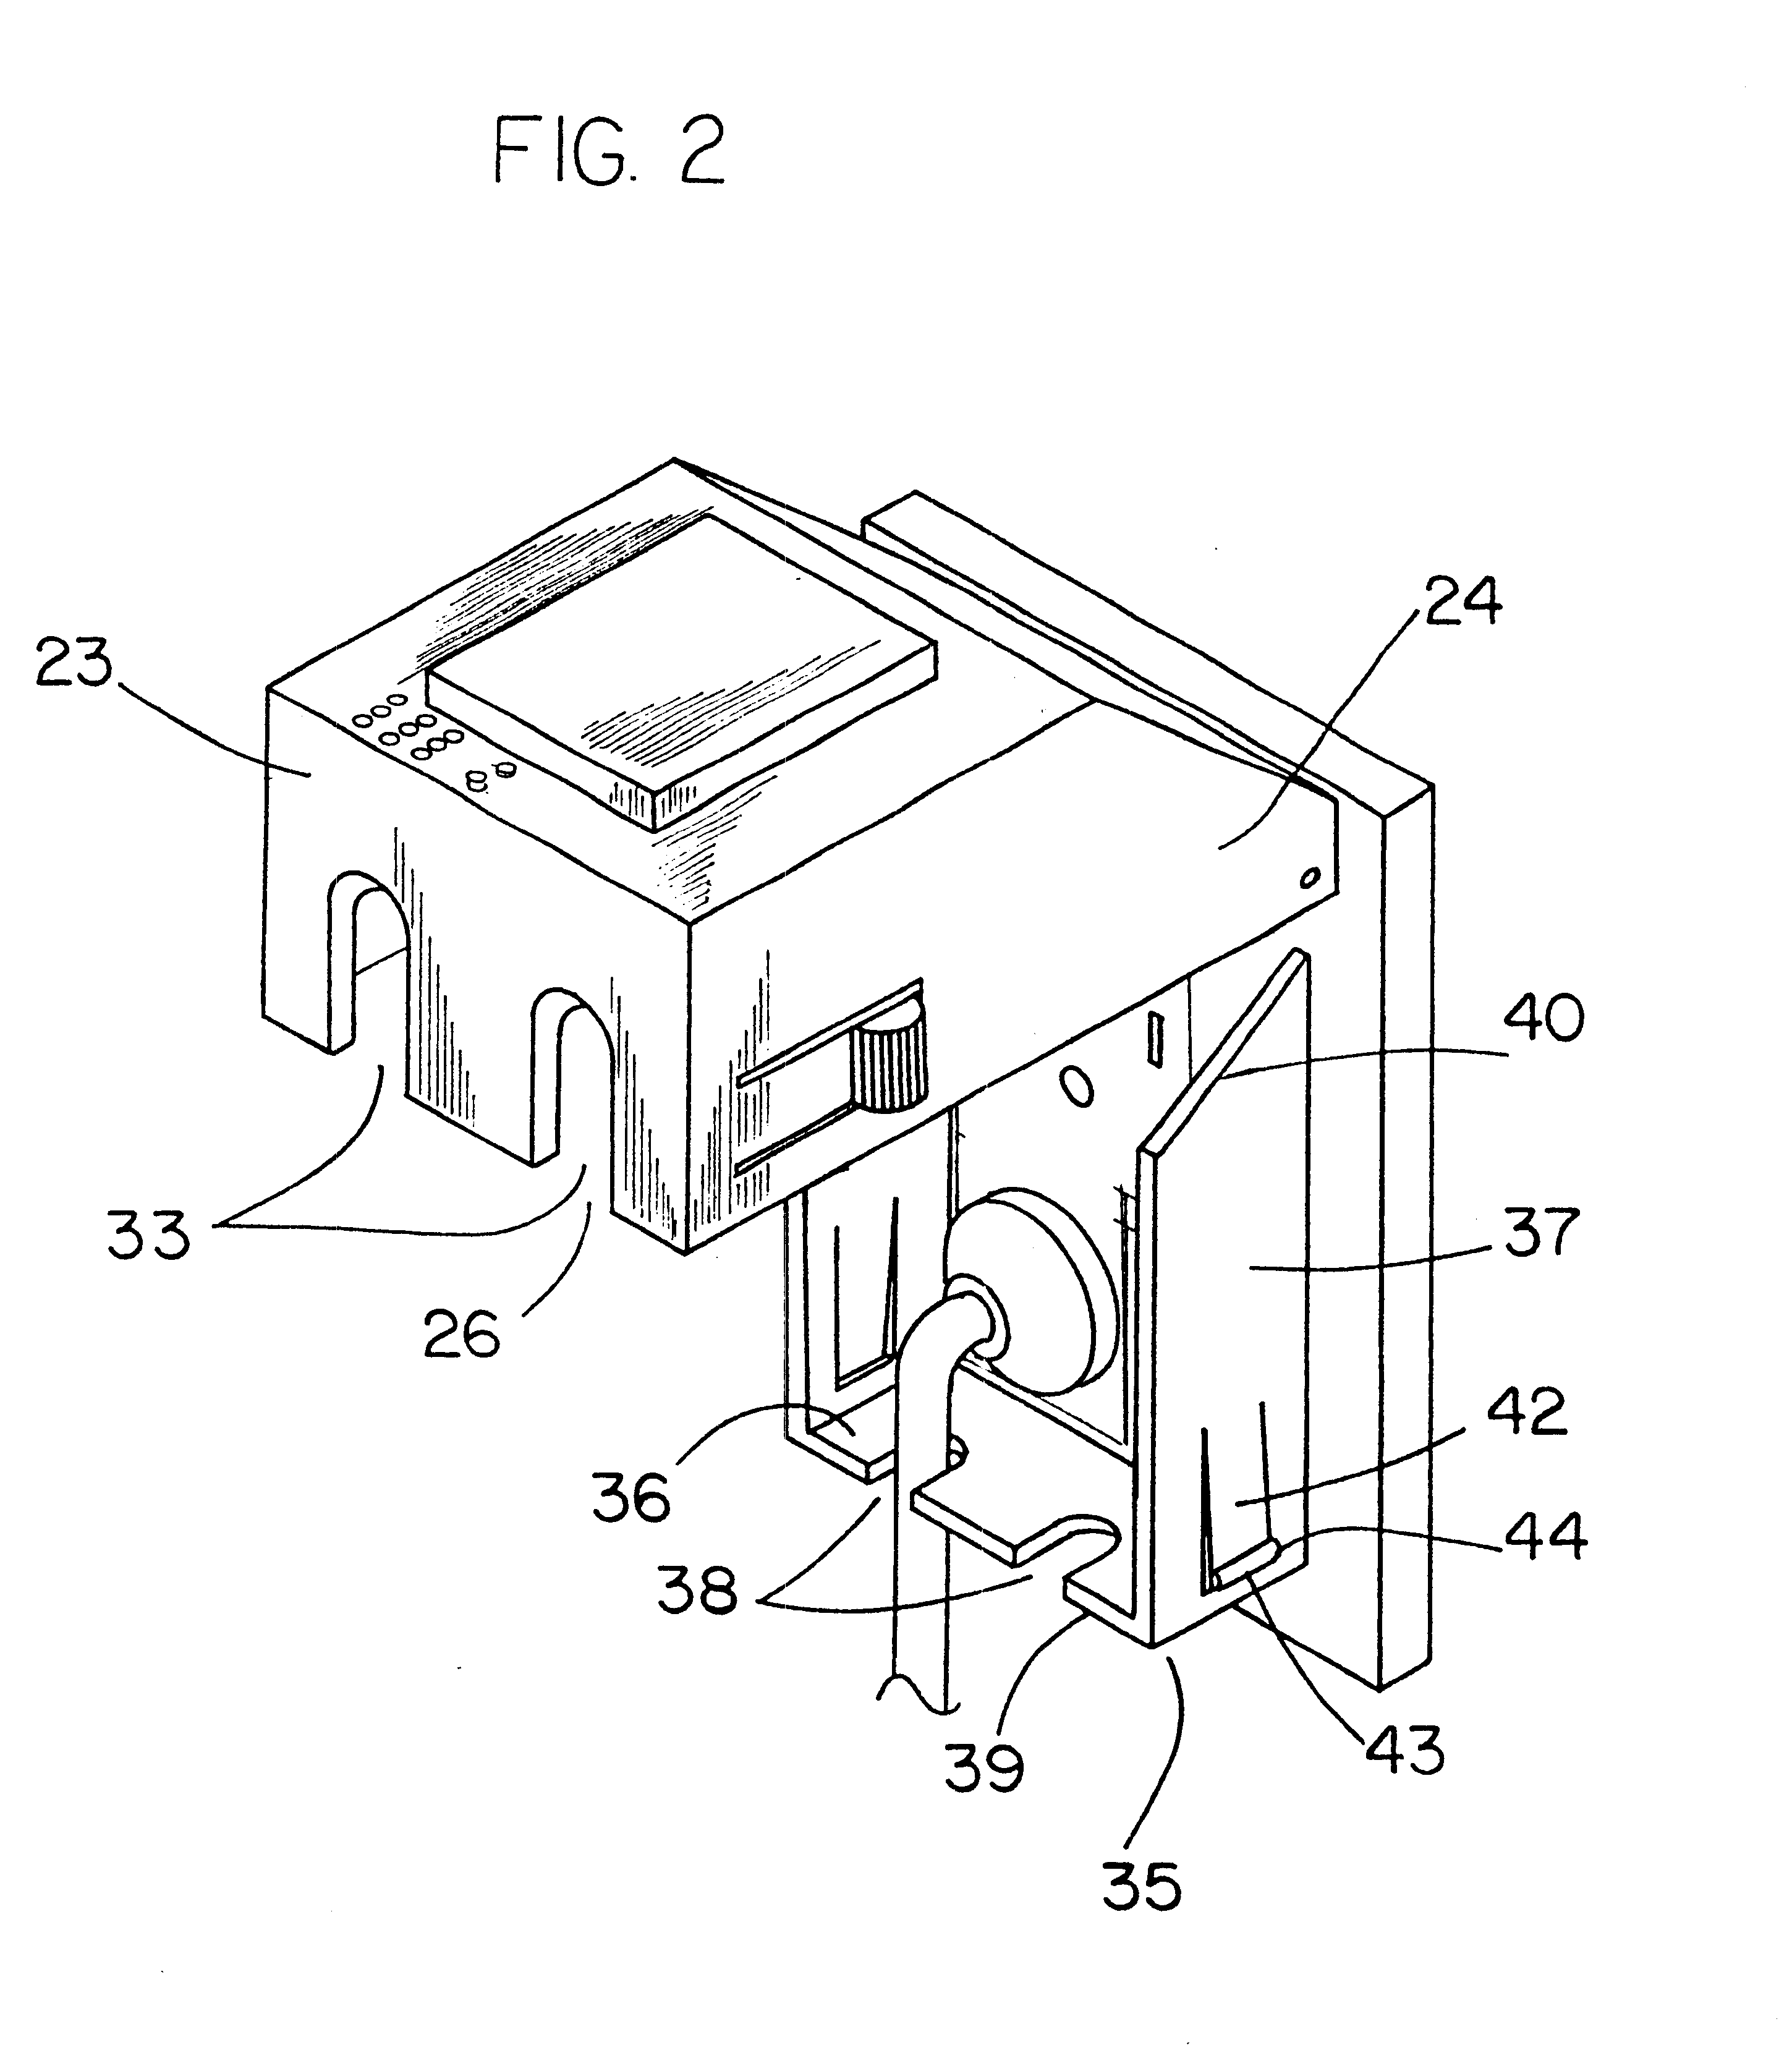 Outlet covering system